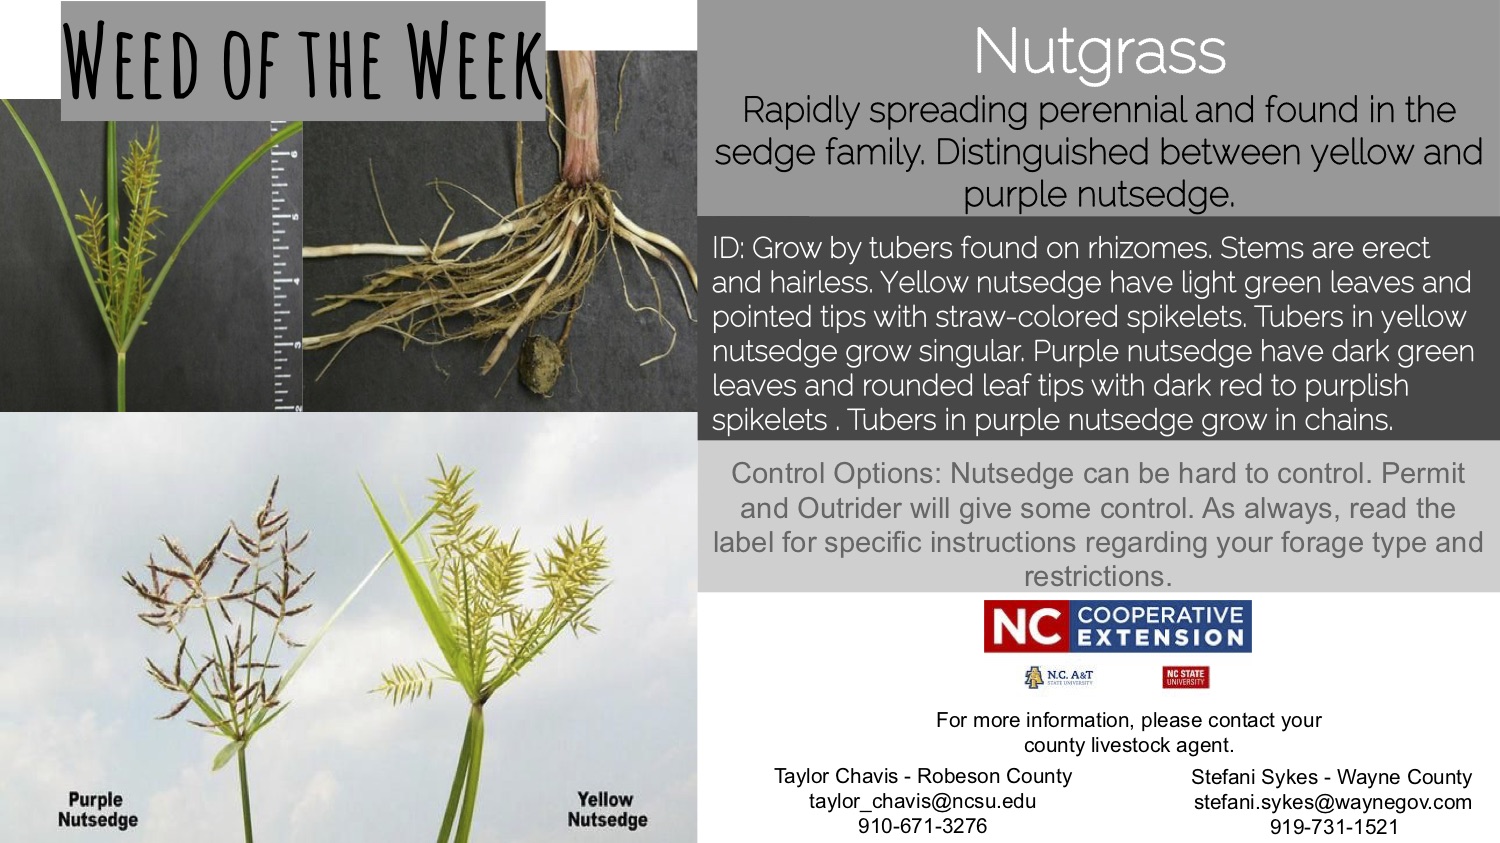 Information on the weed Nutgrass